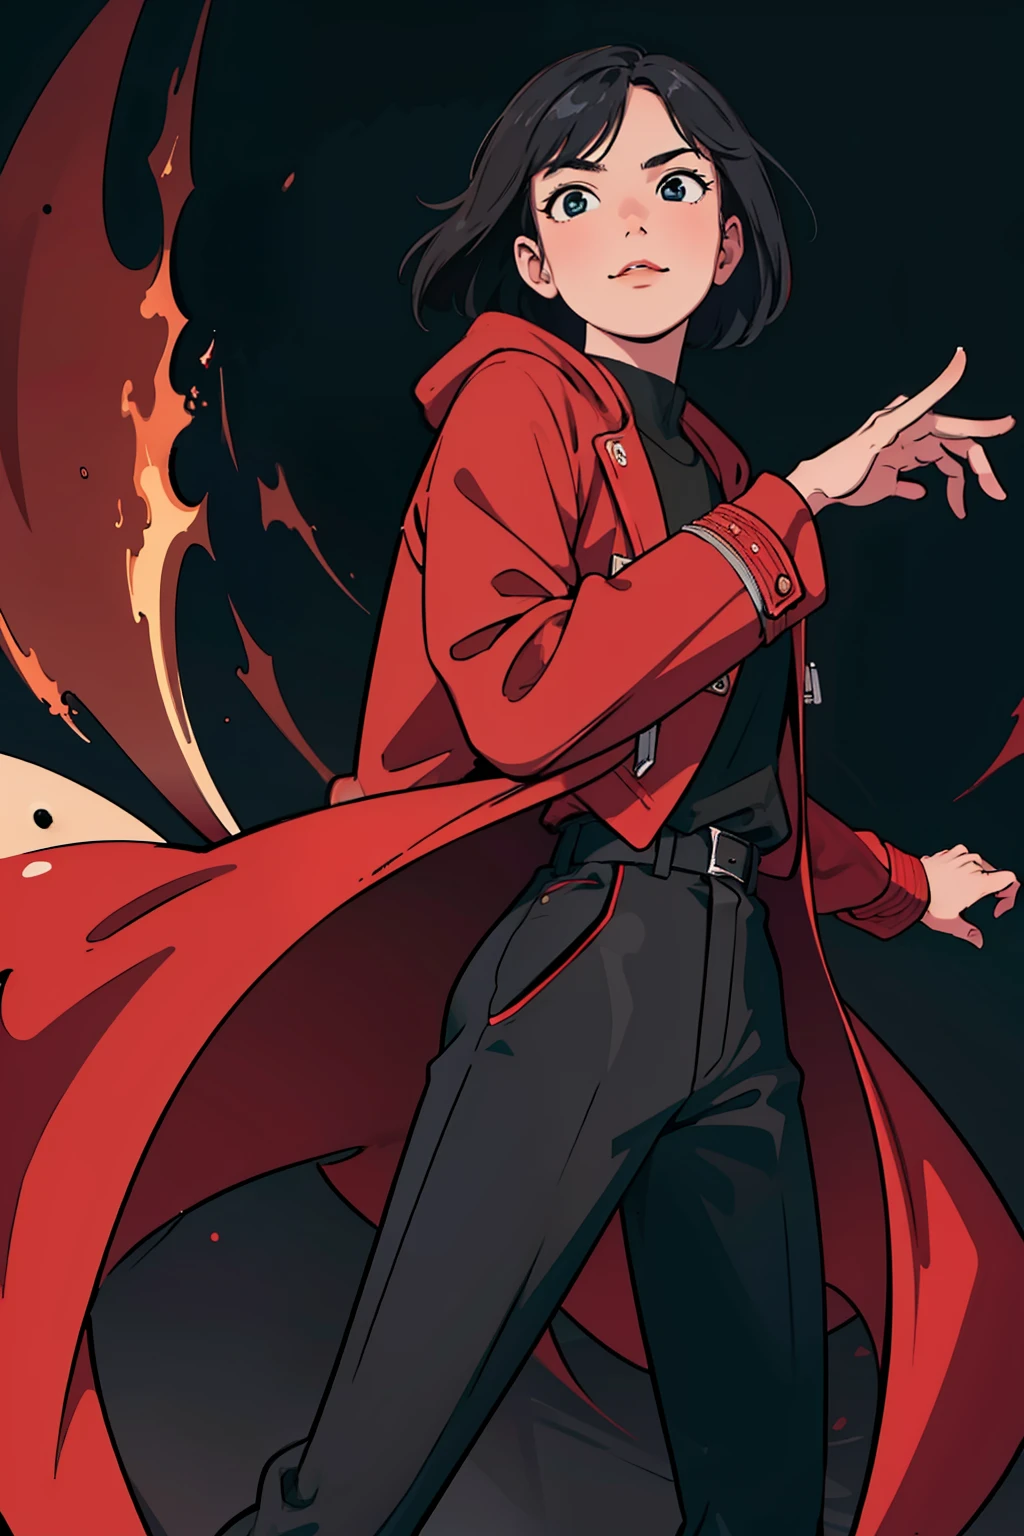 (masterpiece, best quality, high resolution:1.4), 1boy, 1man, boy, black hair, short hair, kung fu pose, red coat, black pants, star vs the forces of evil style, happy, dark outfit, looking at camera, good vibe